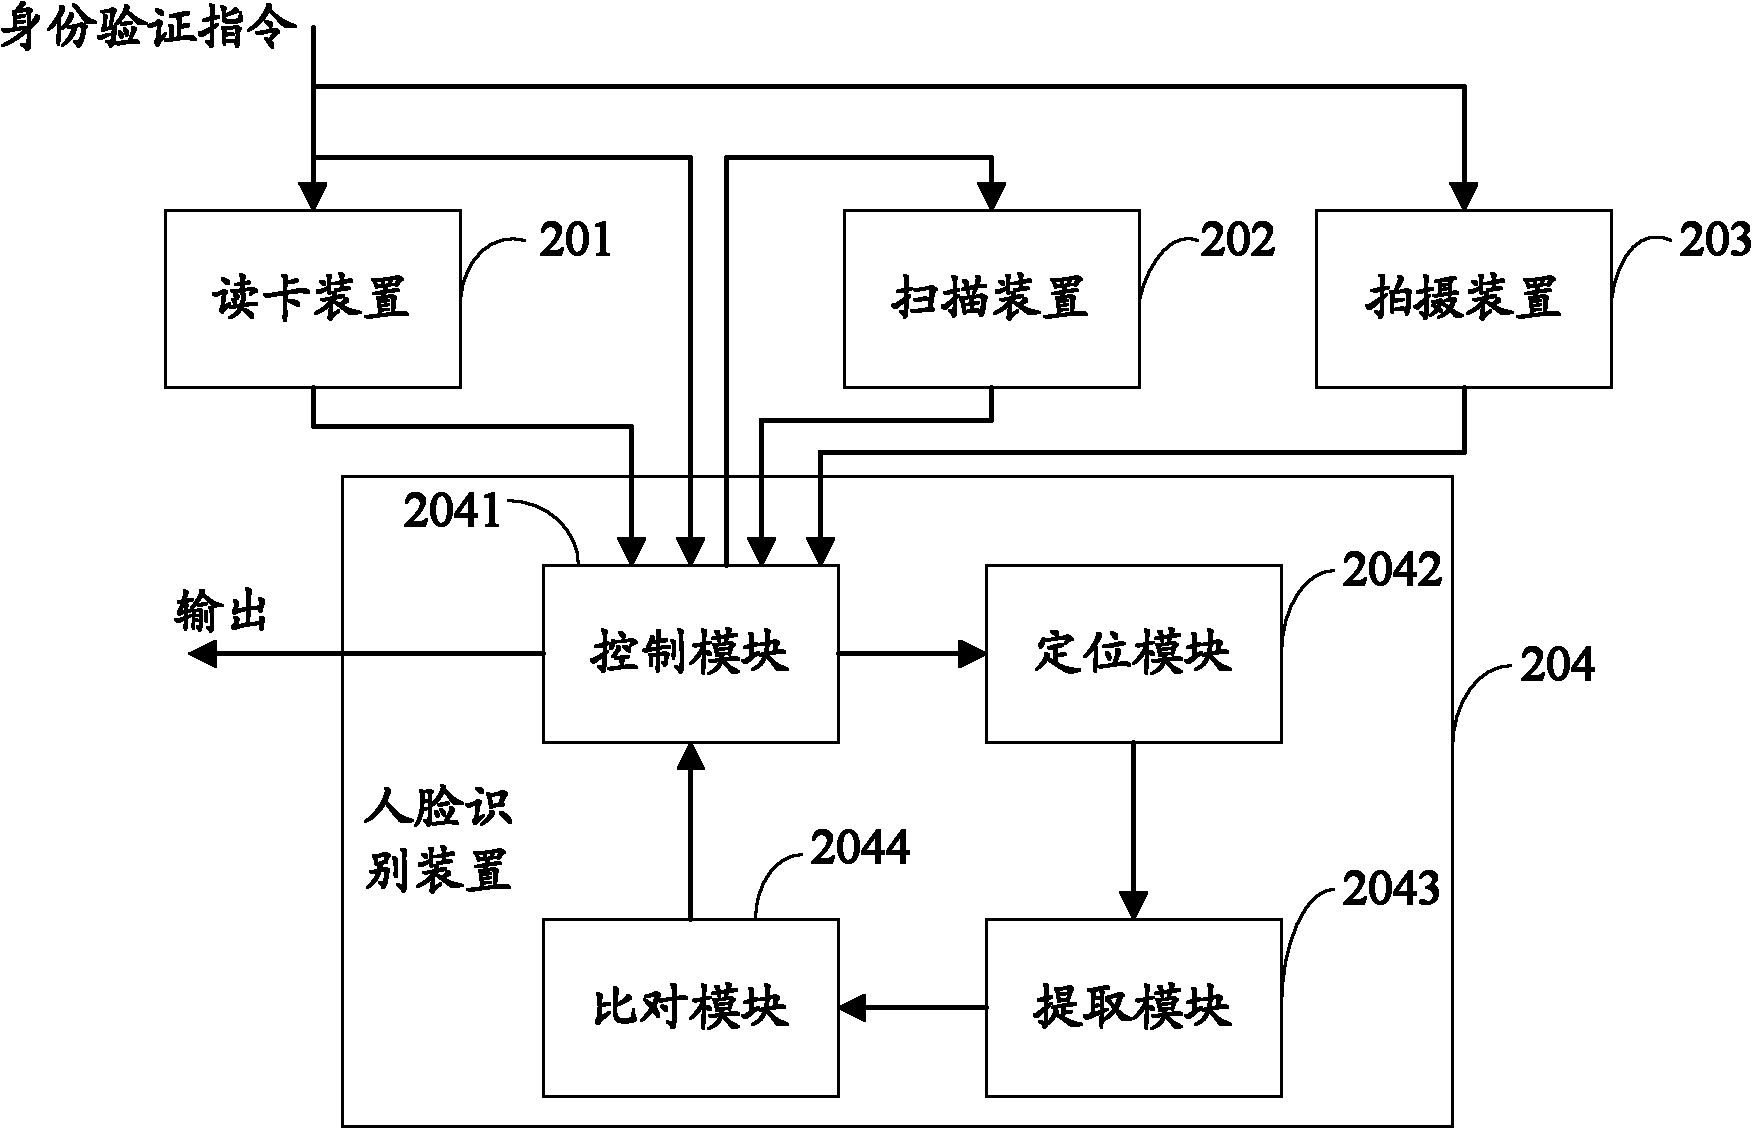 Second-generation identity card-based authentication method and system